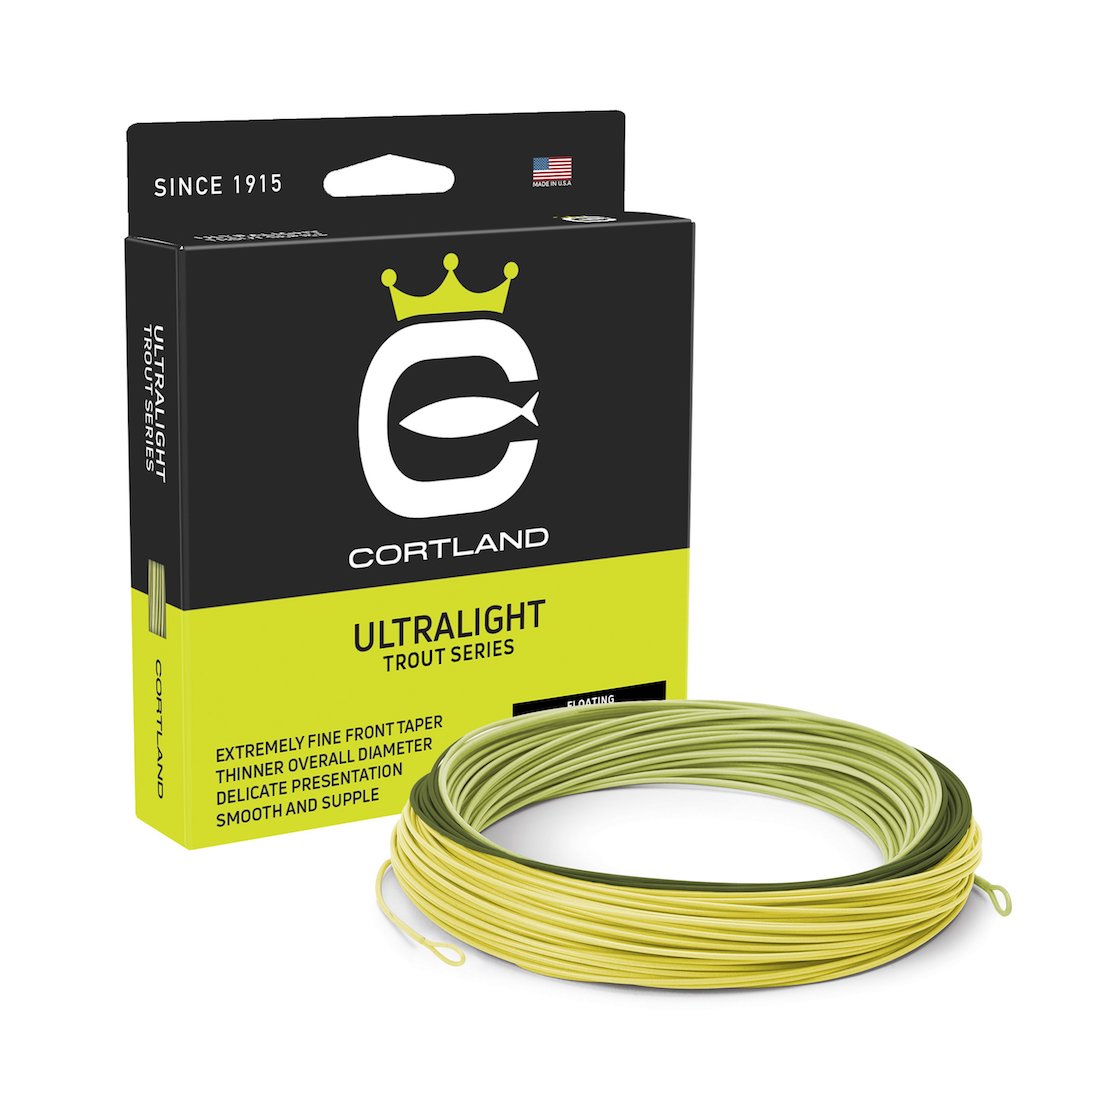 Floating Fly Line Cortland 444 Free Postage - NEW DT3F/DT4F/DT5F 